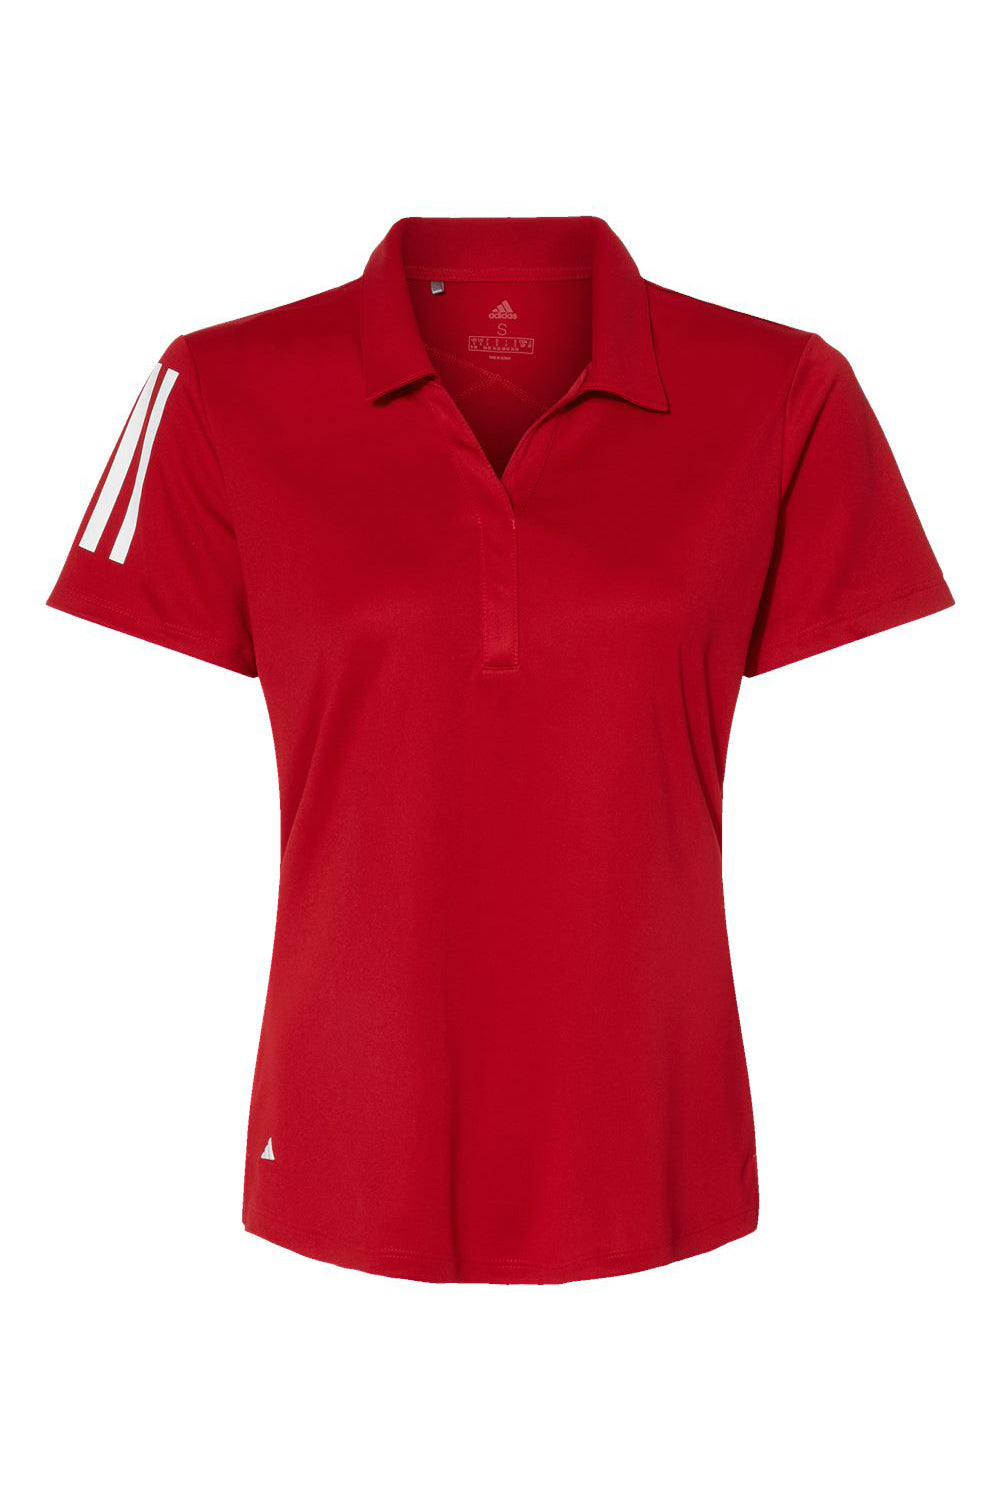 Adidas A481 Womens Floating 3 Stripes Polo Shirt Team Power Red/White Flat Front